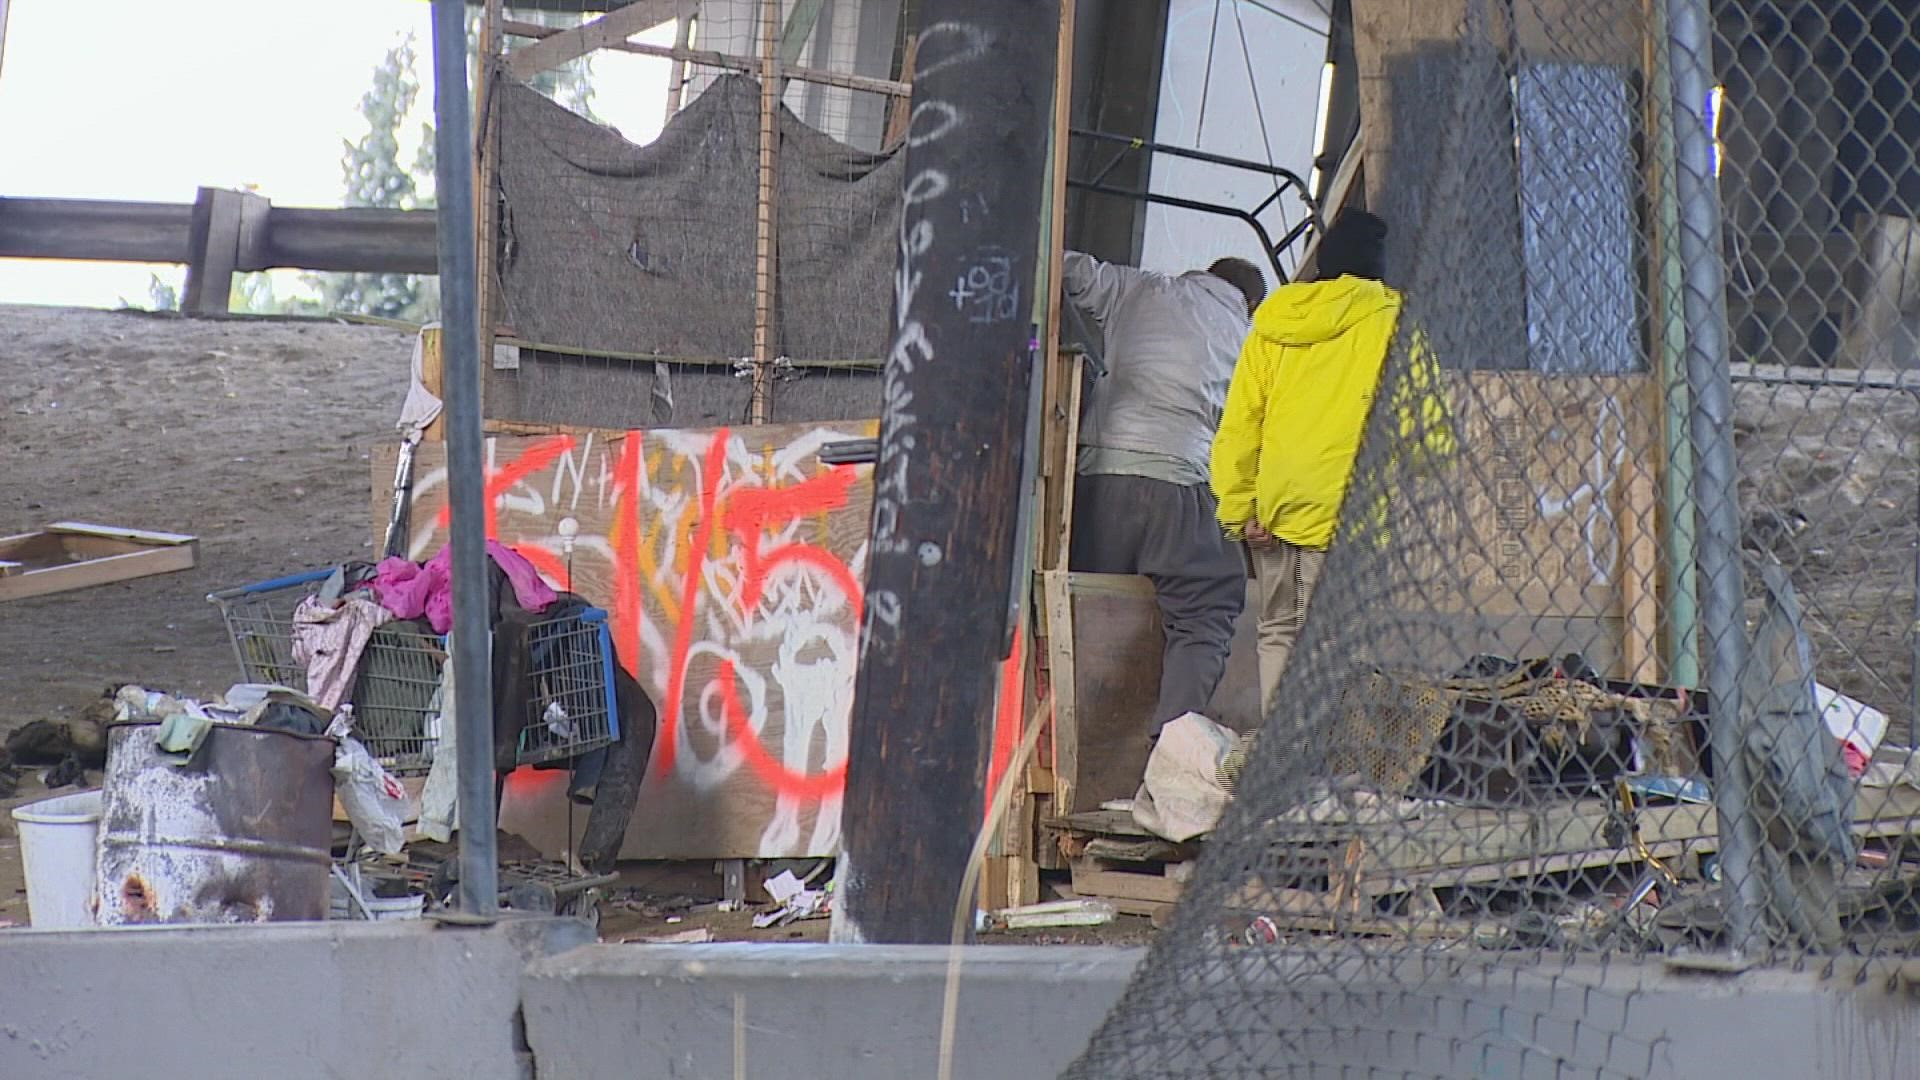 A homeless encampment under the Ship Canal Bridge has some neighbors concerned, but all solutions appear to be complicated.